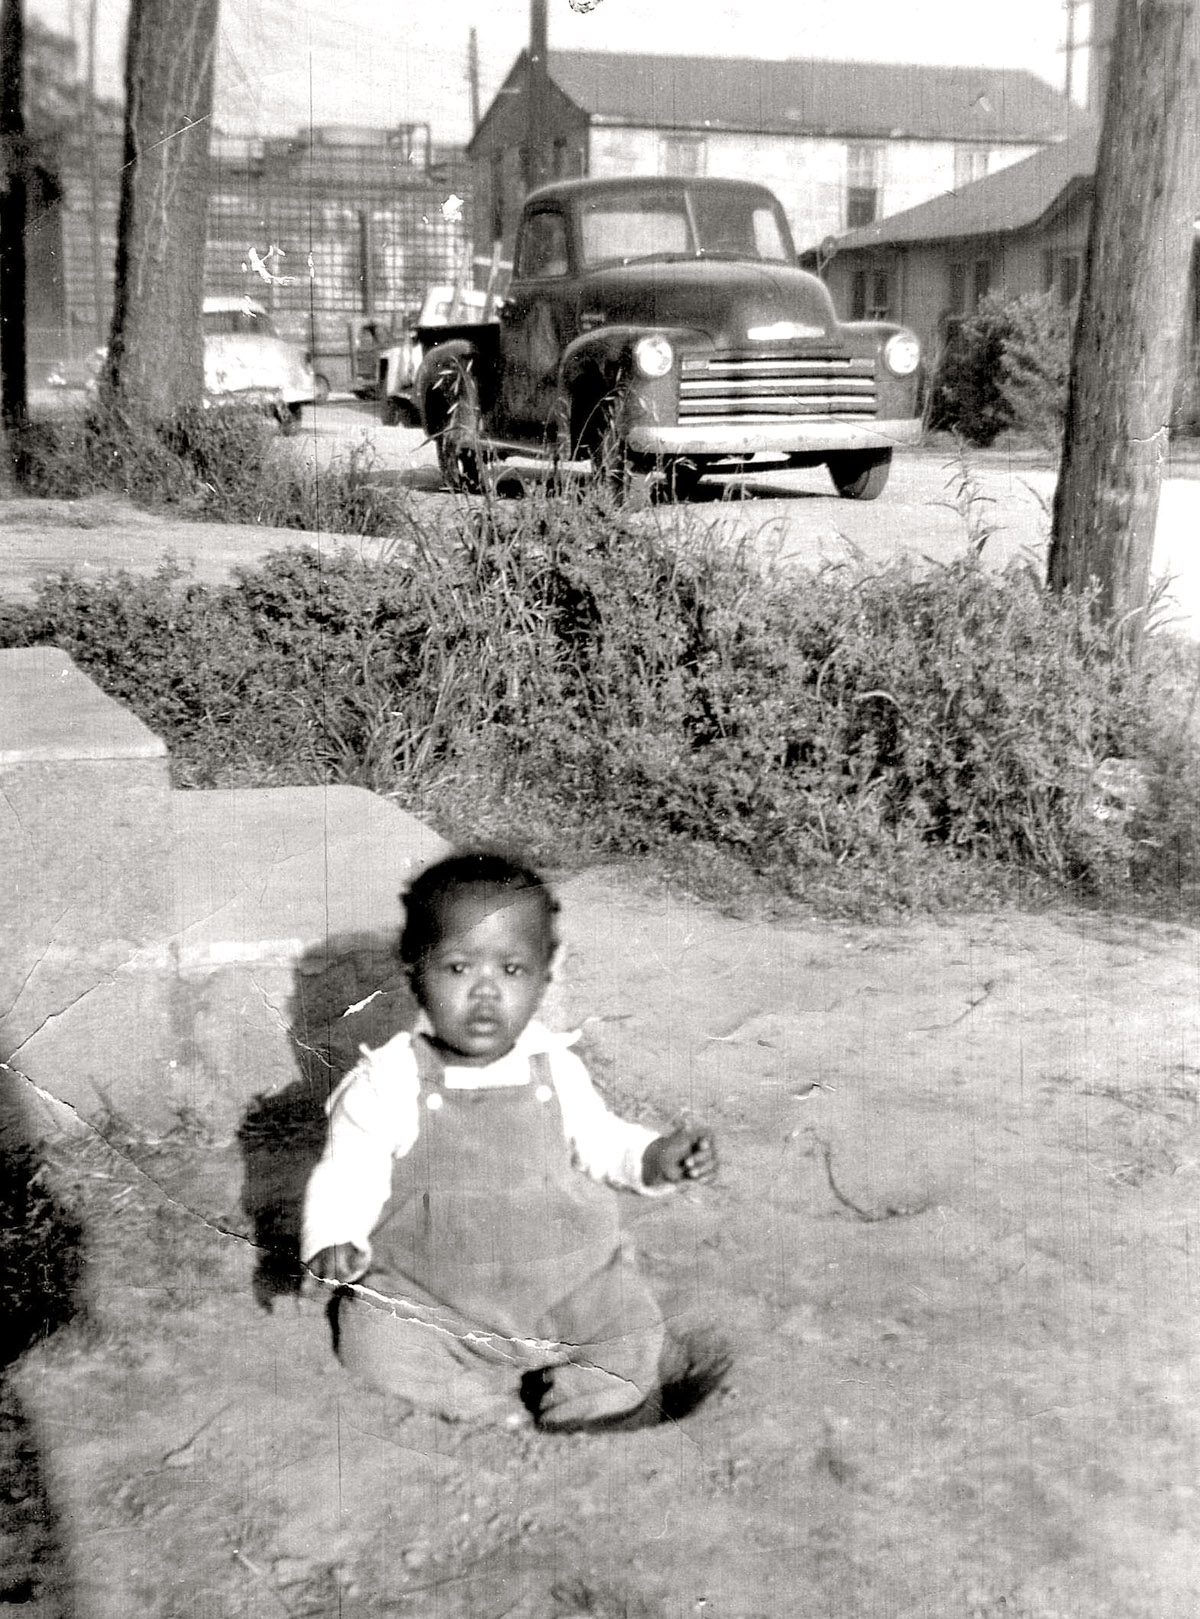 Me, approx. age 2 in 1957, Laurel, Mississippi. The Masonite plant looms in the background. View full size.